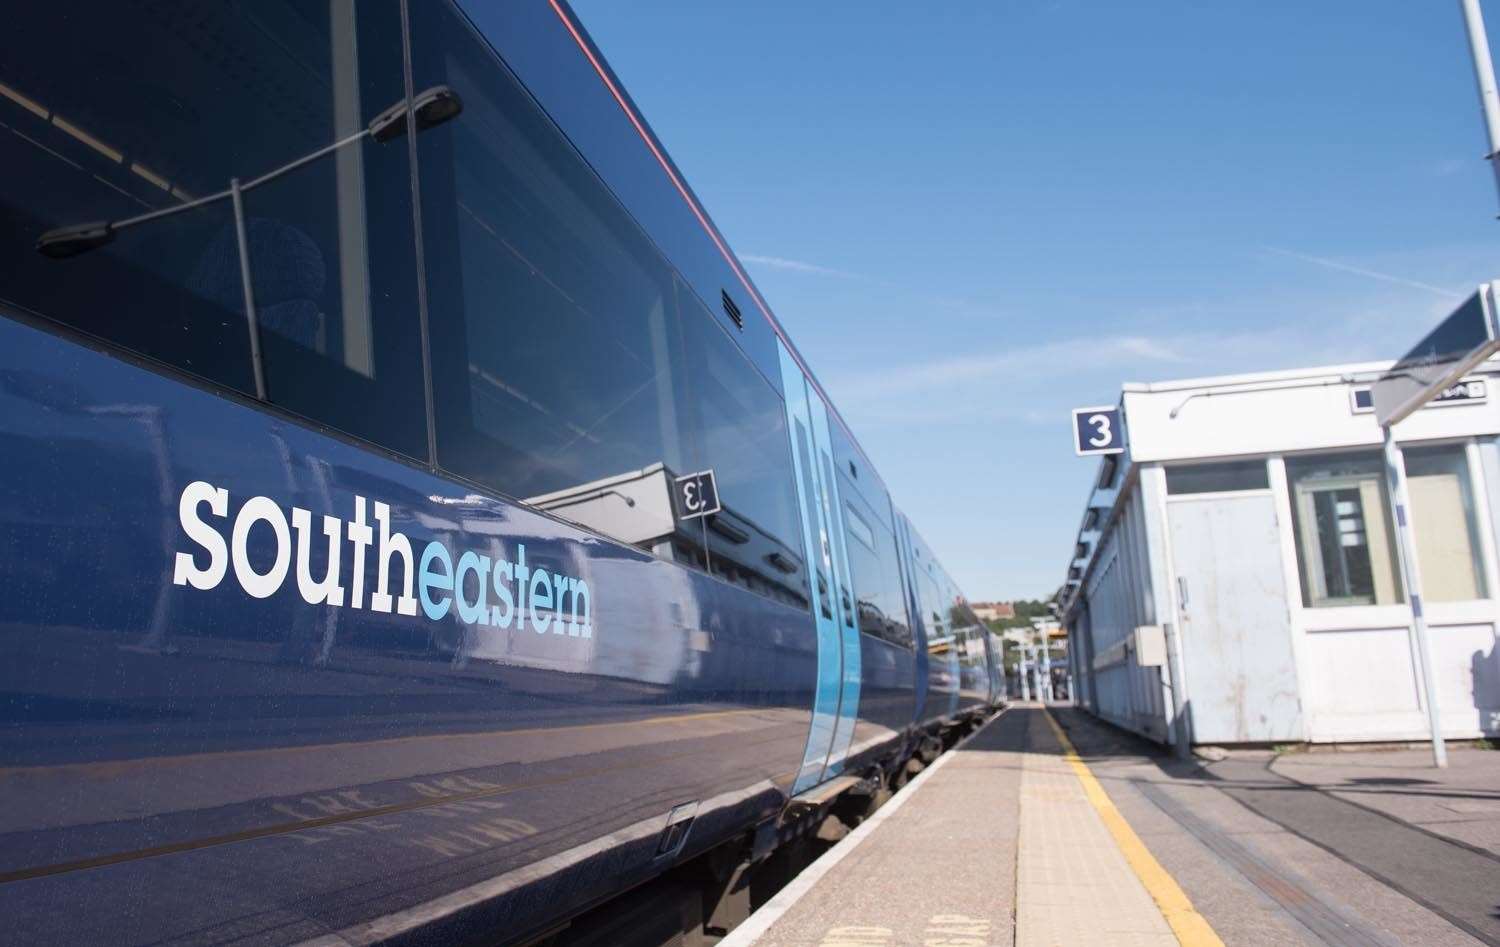 Southeastern will increase its service from Monday